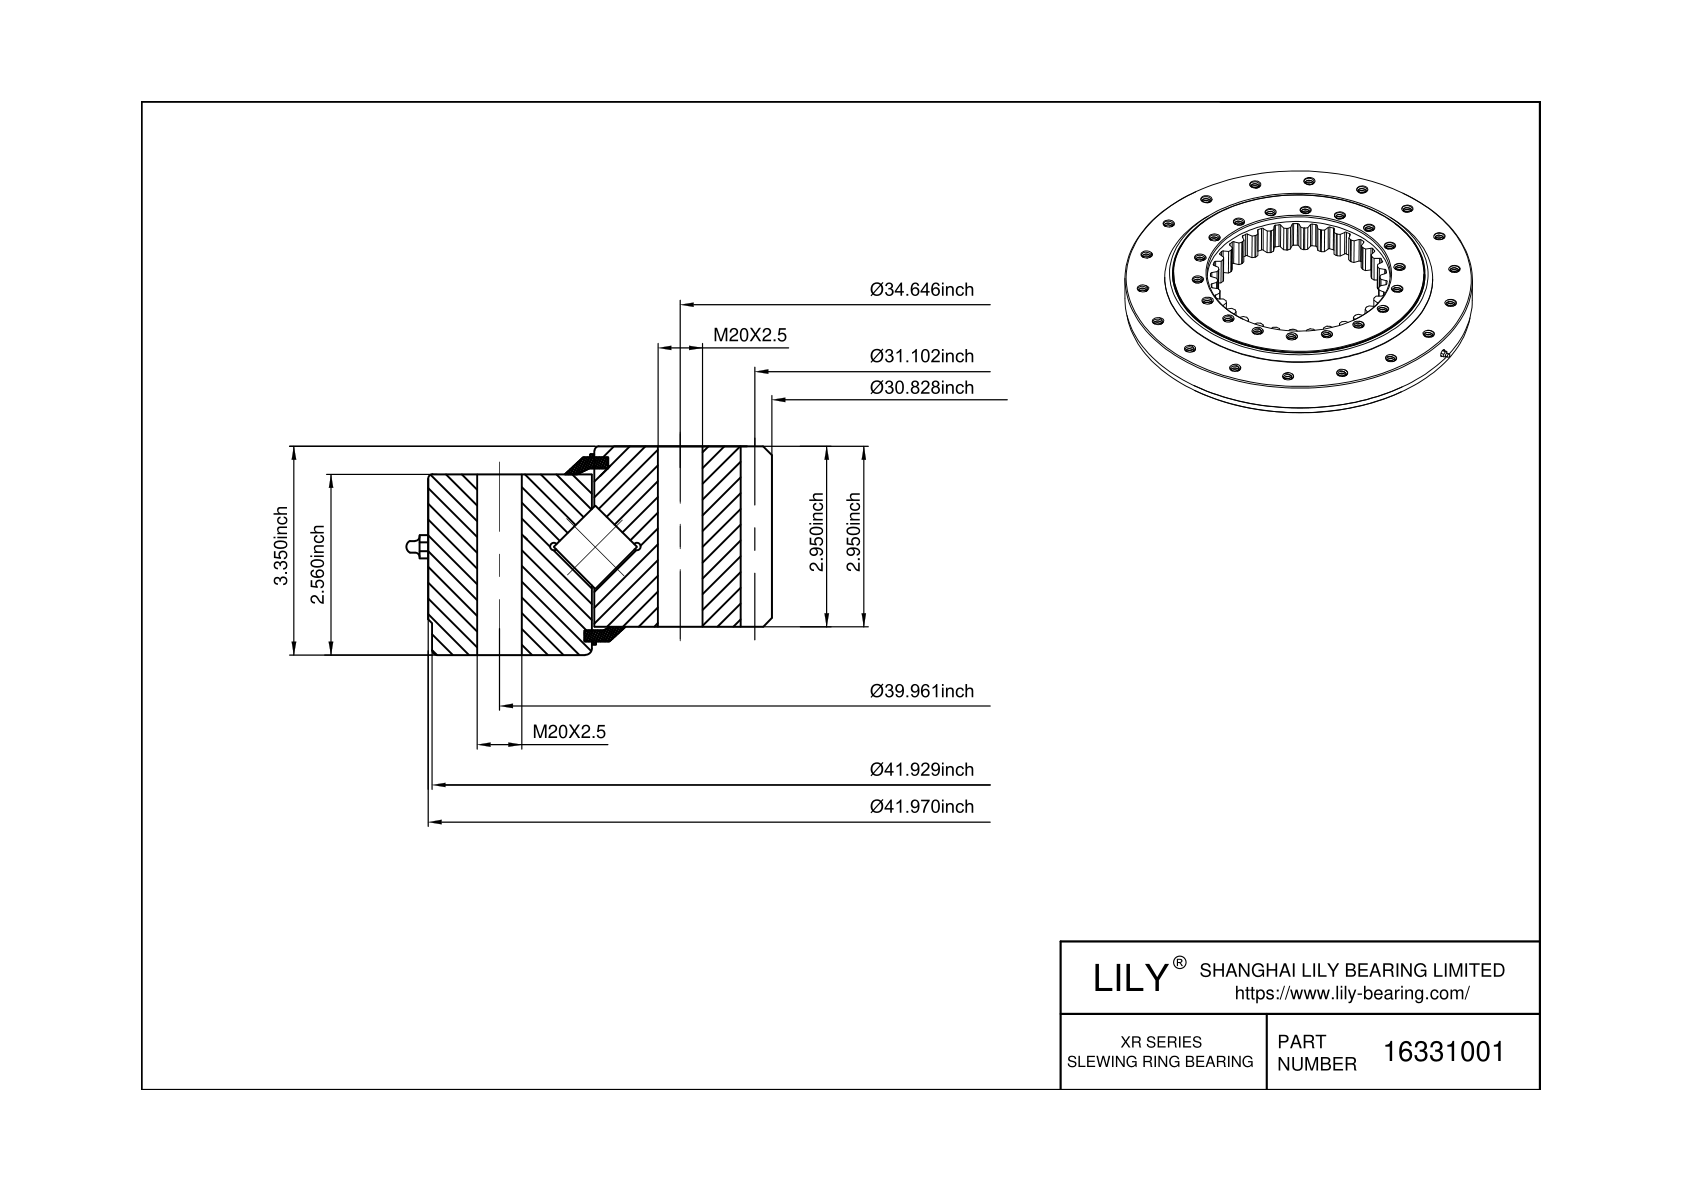 16331001 XR Series cad drawing